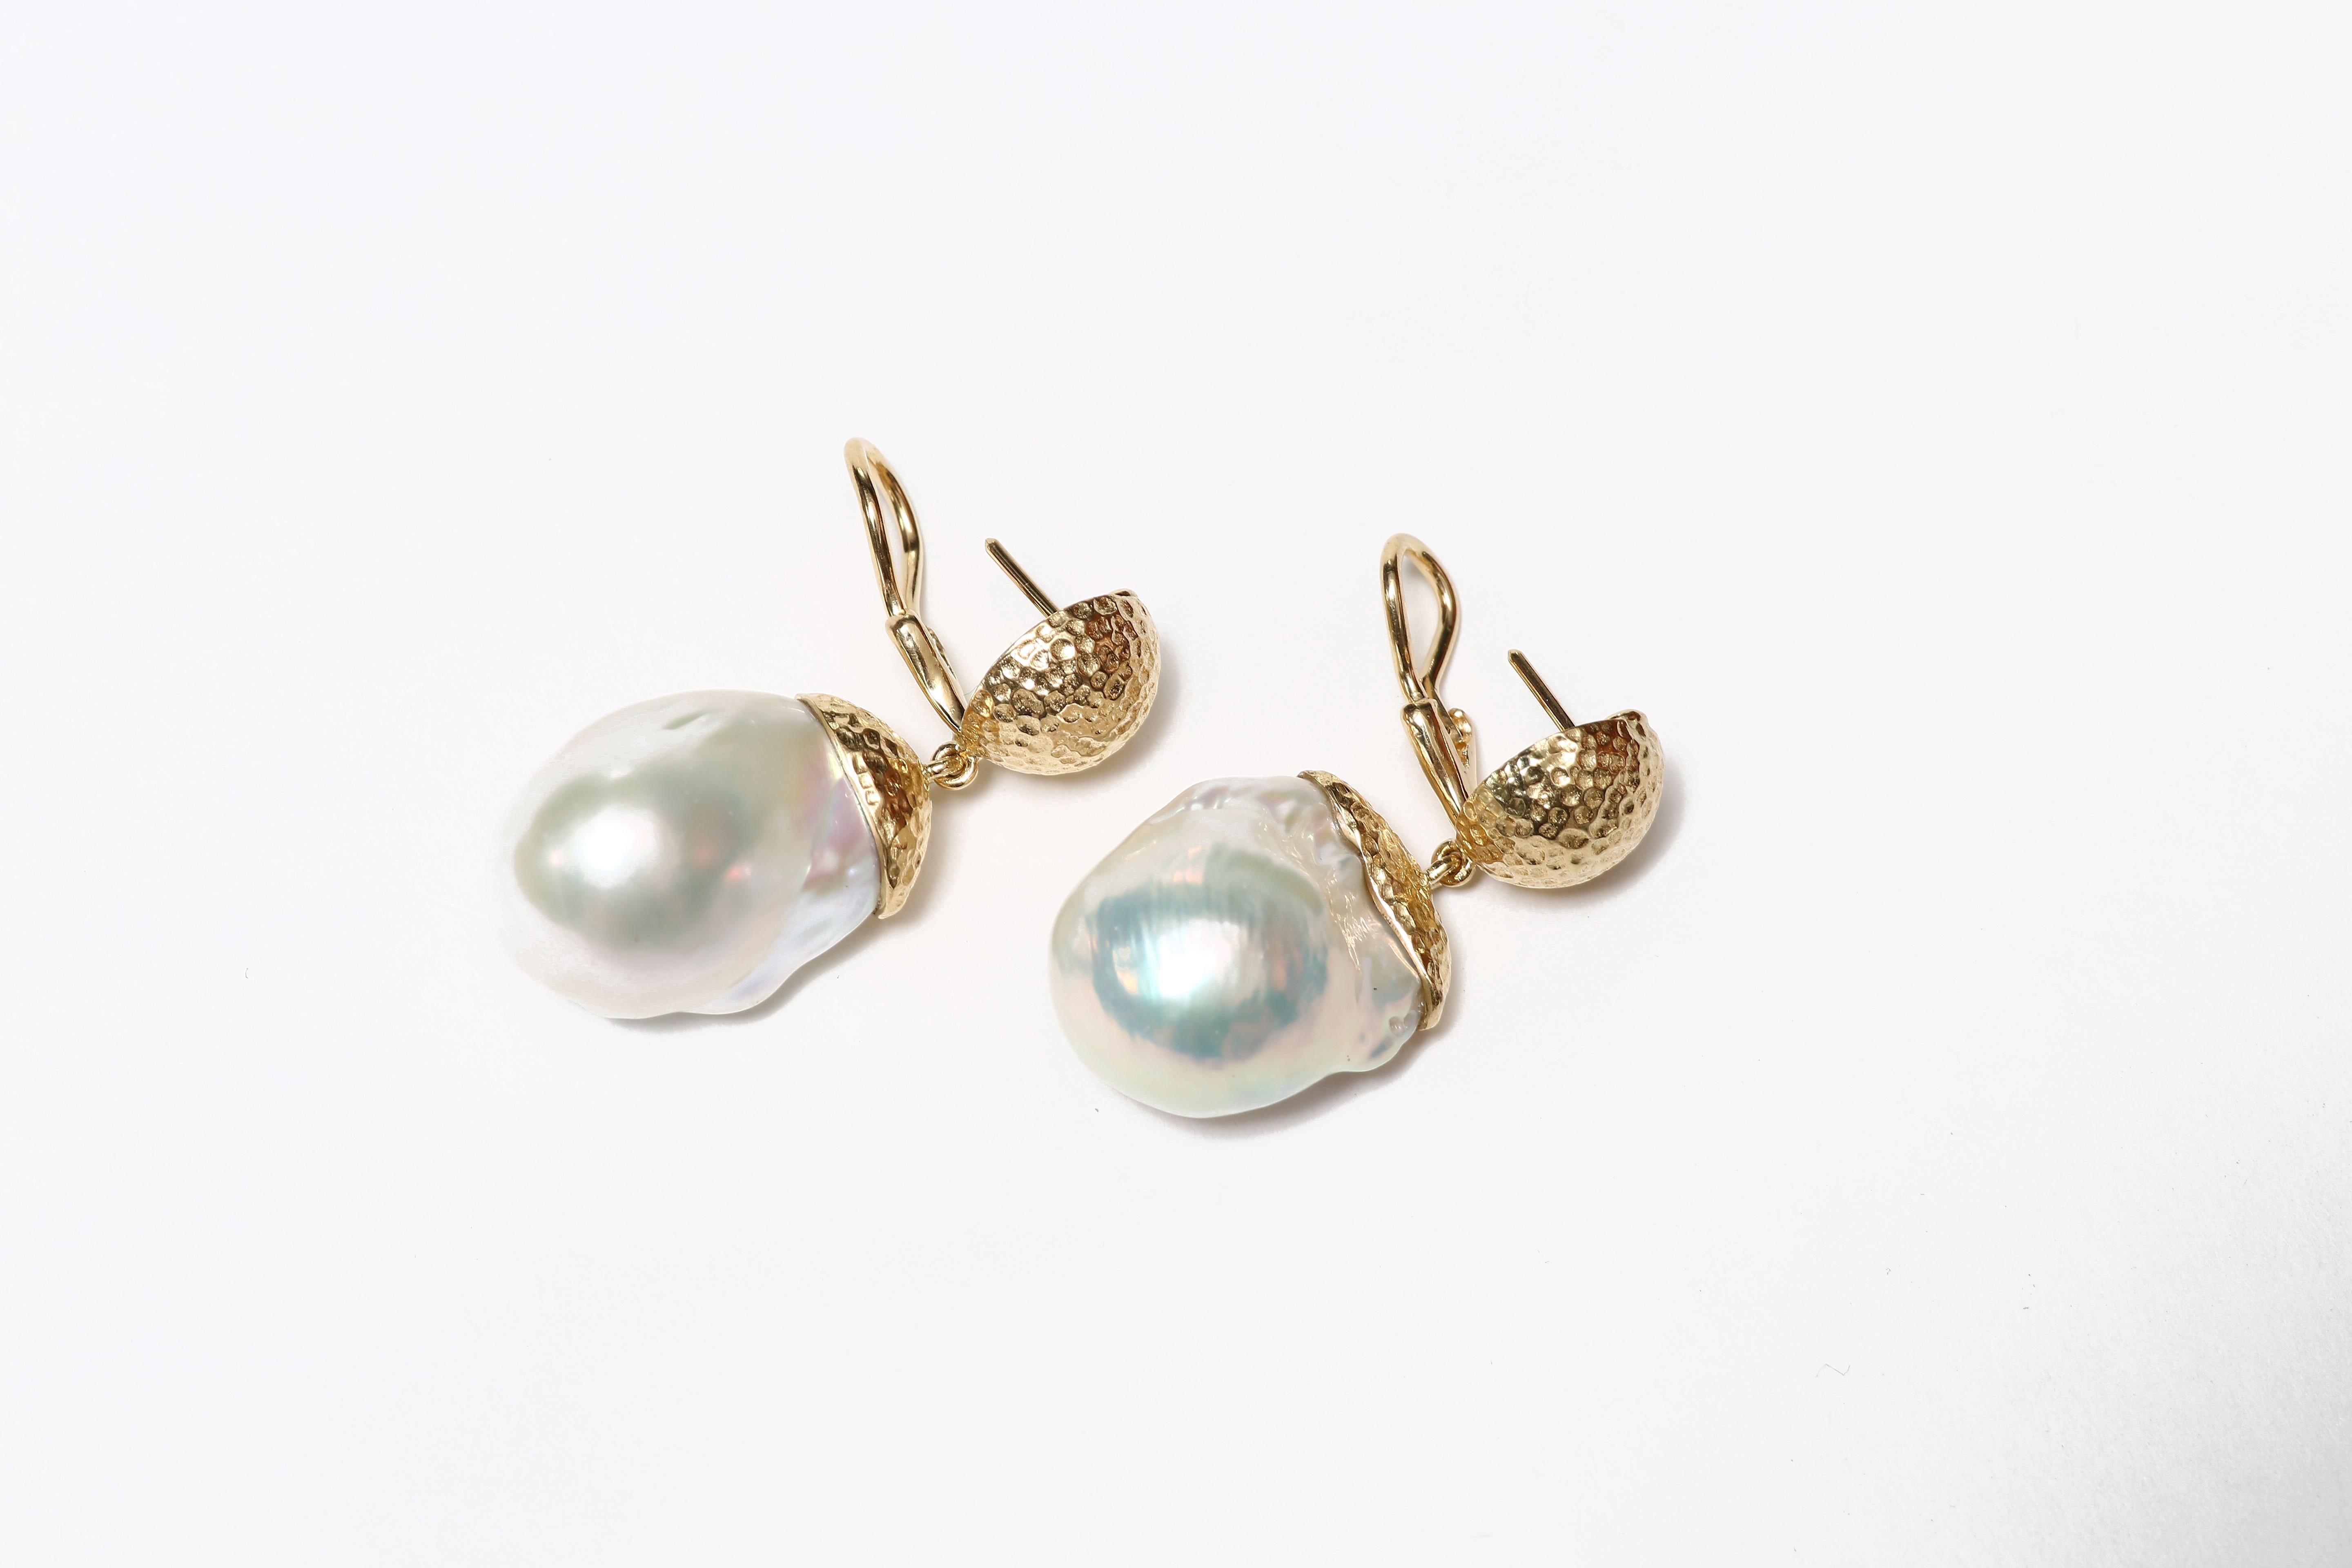  The elegant earrings finely handcrafted with hand-hammered 18K gold and baroque pearl drops.  

Designed by AMANDA CLARK for Altfield, our collection focuses on natures most lovely materials such as pearls, amber, turquoise, coral and semi-precious